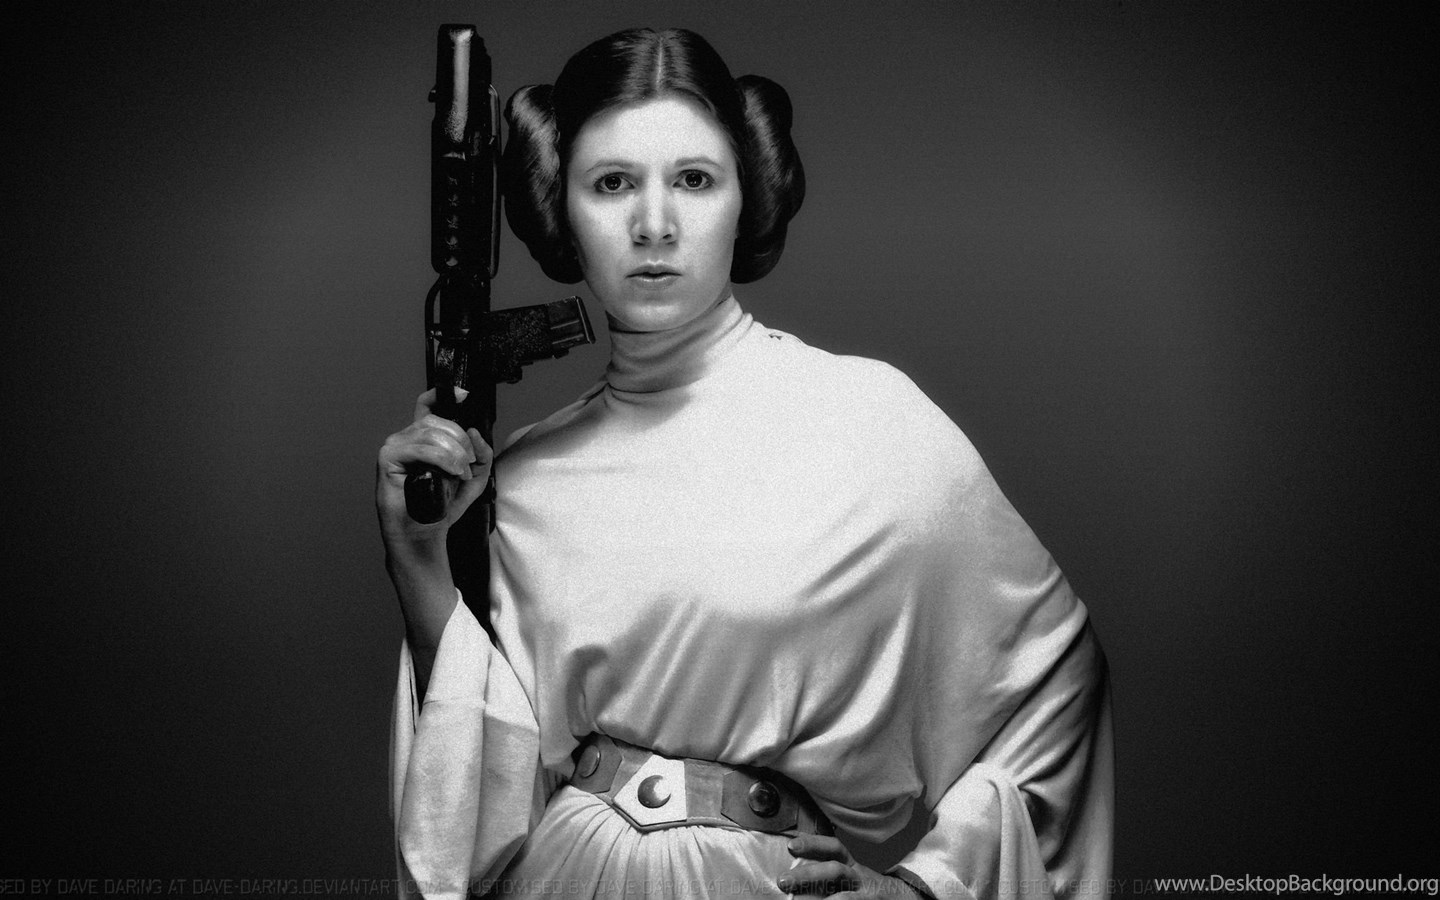 Download Carrie Fisher Princess Leia XLVII V3 By Dave Daring On DeviantArt ...